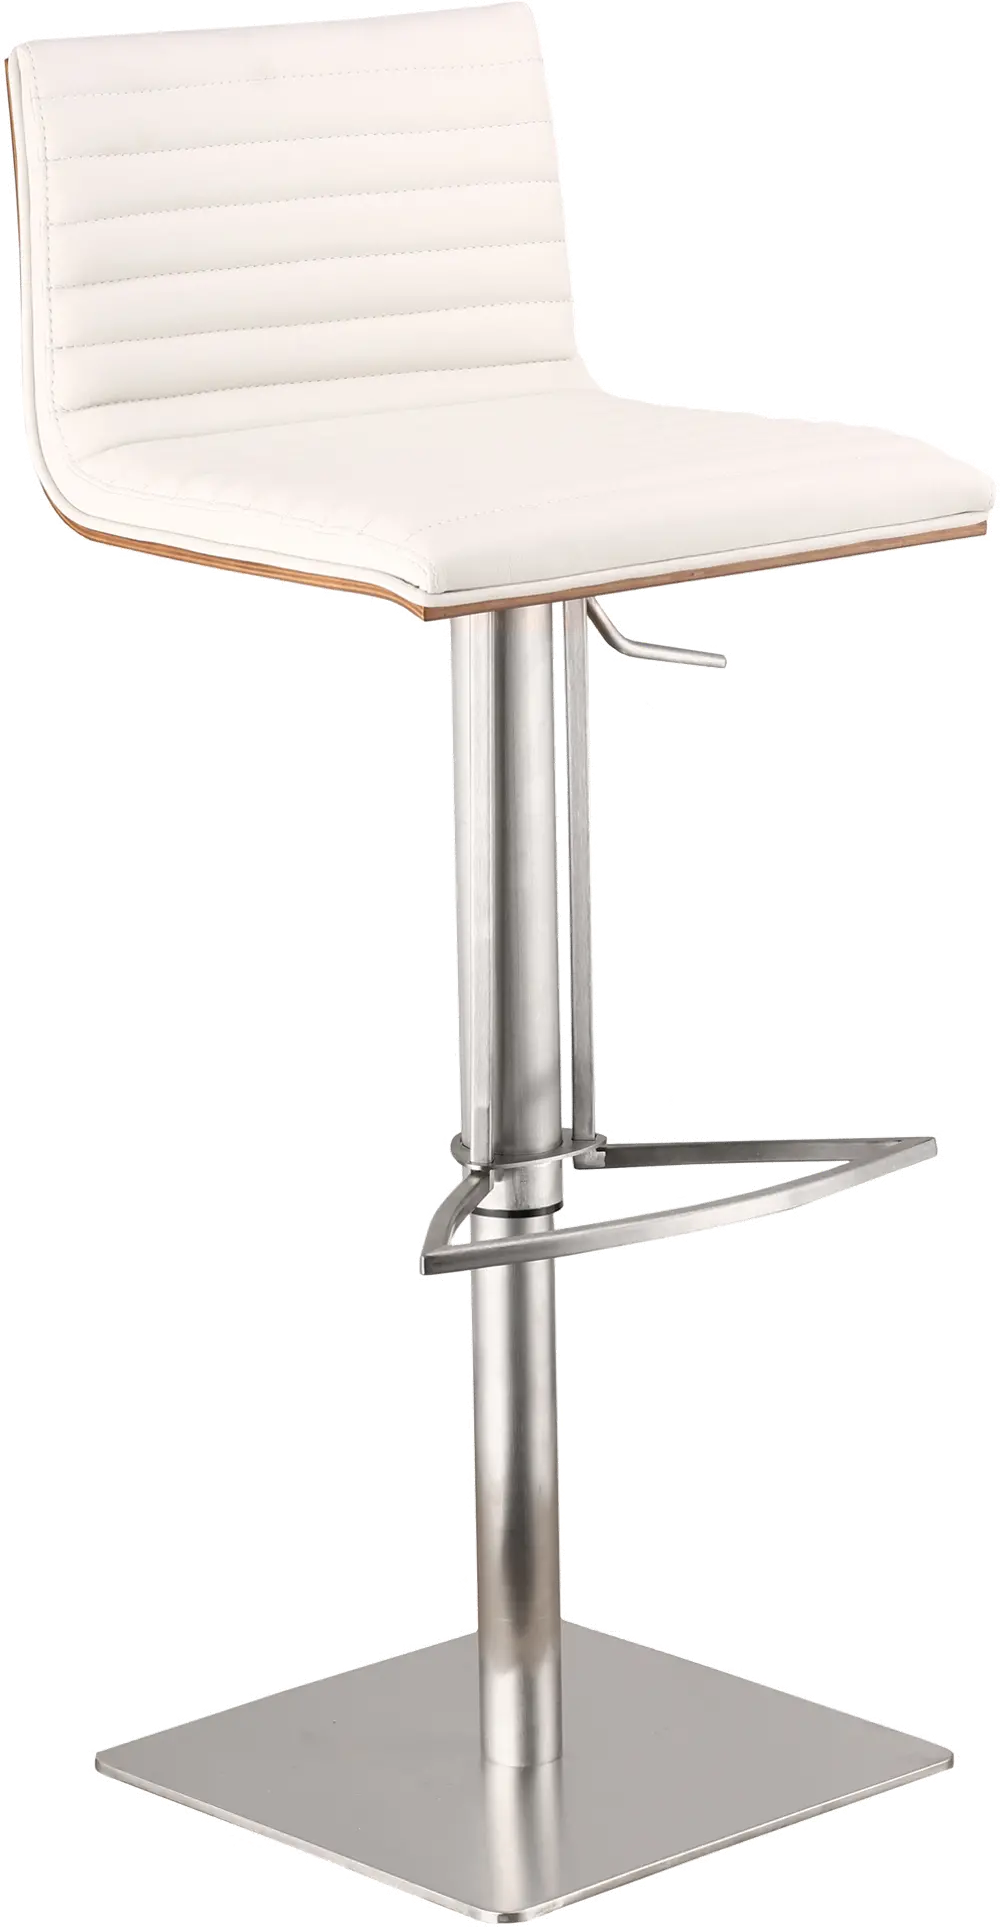 LCCASWBAWHB201 Café White and Chrome Adjustable Height Bar Stool-1